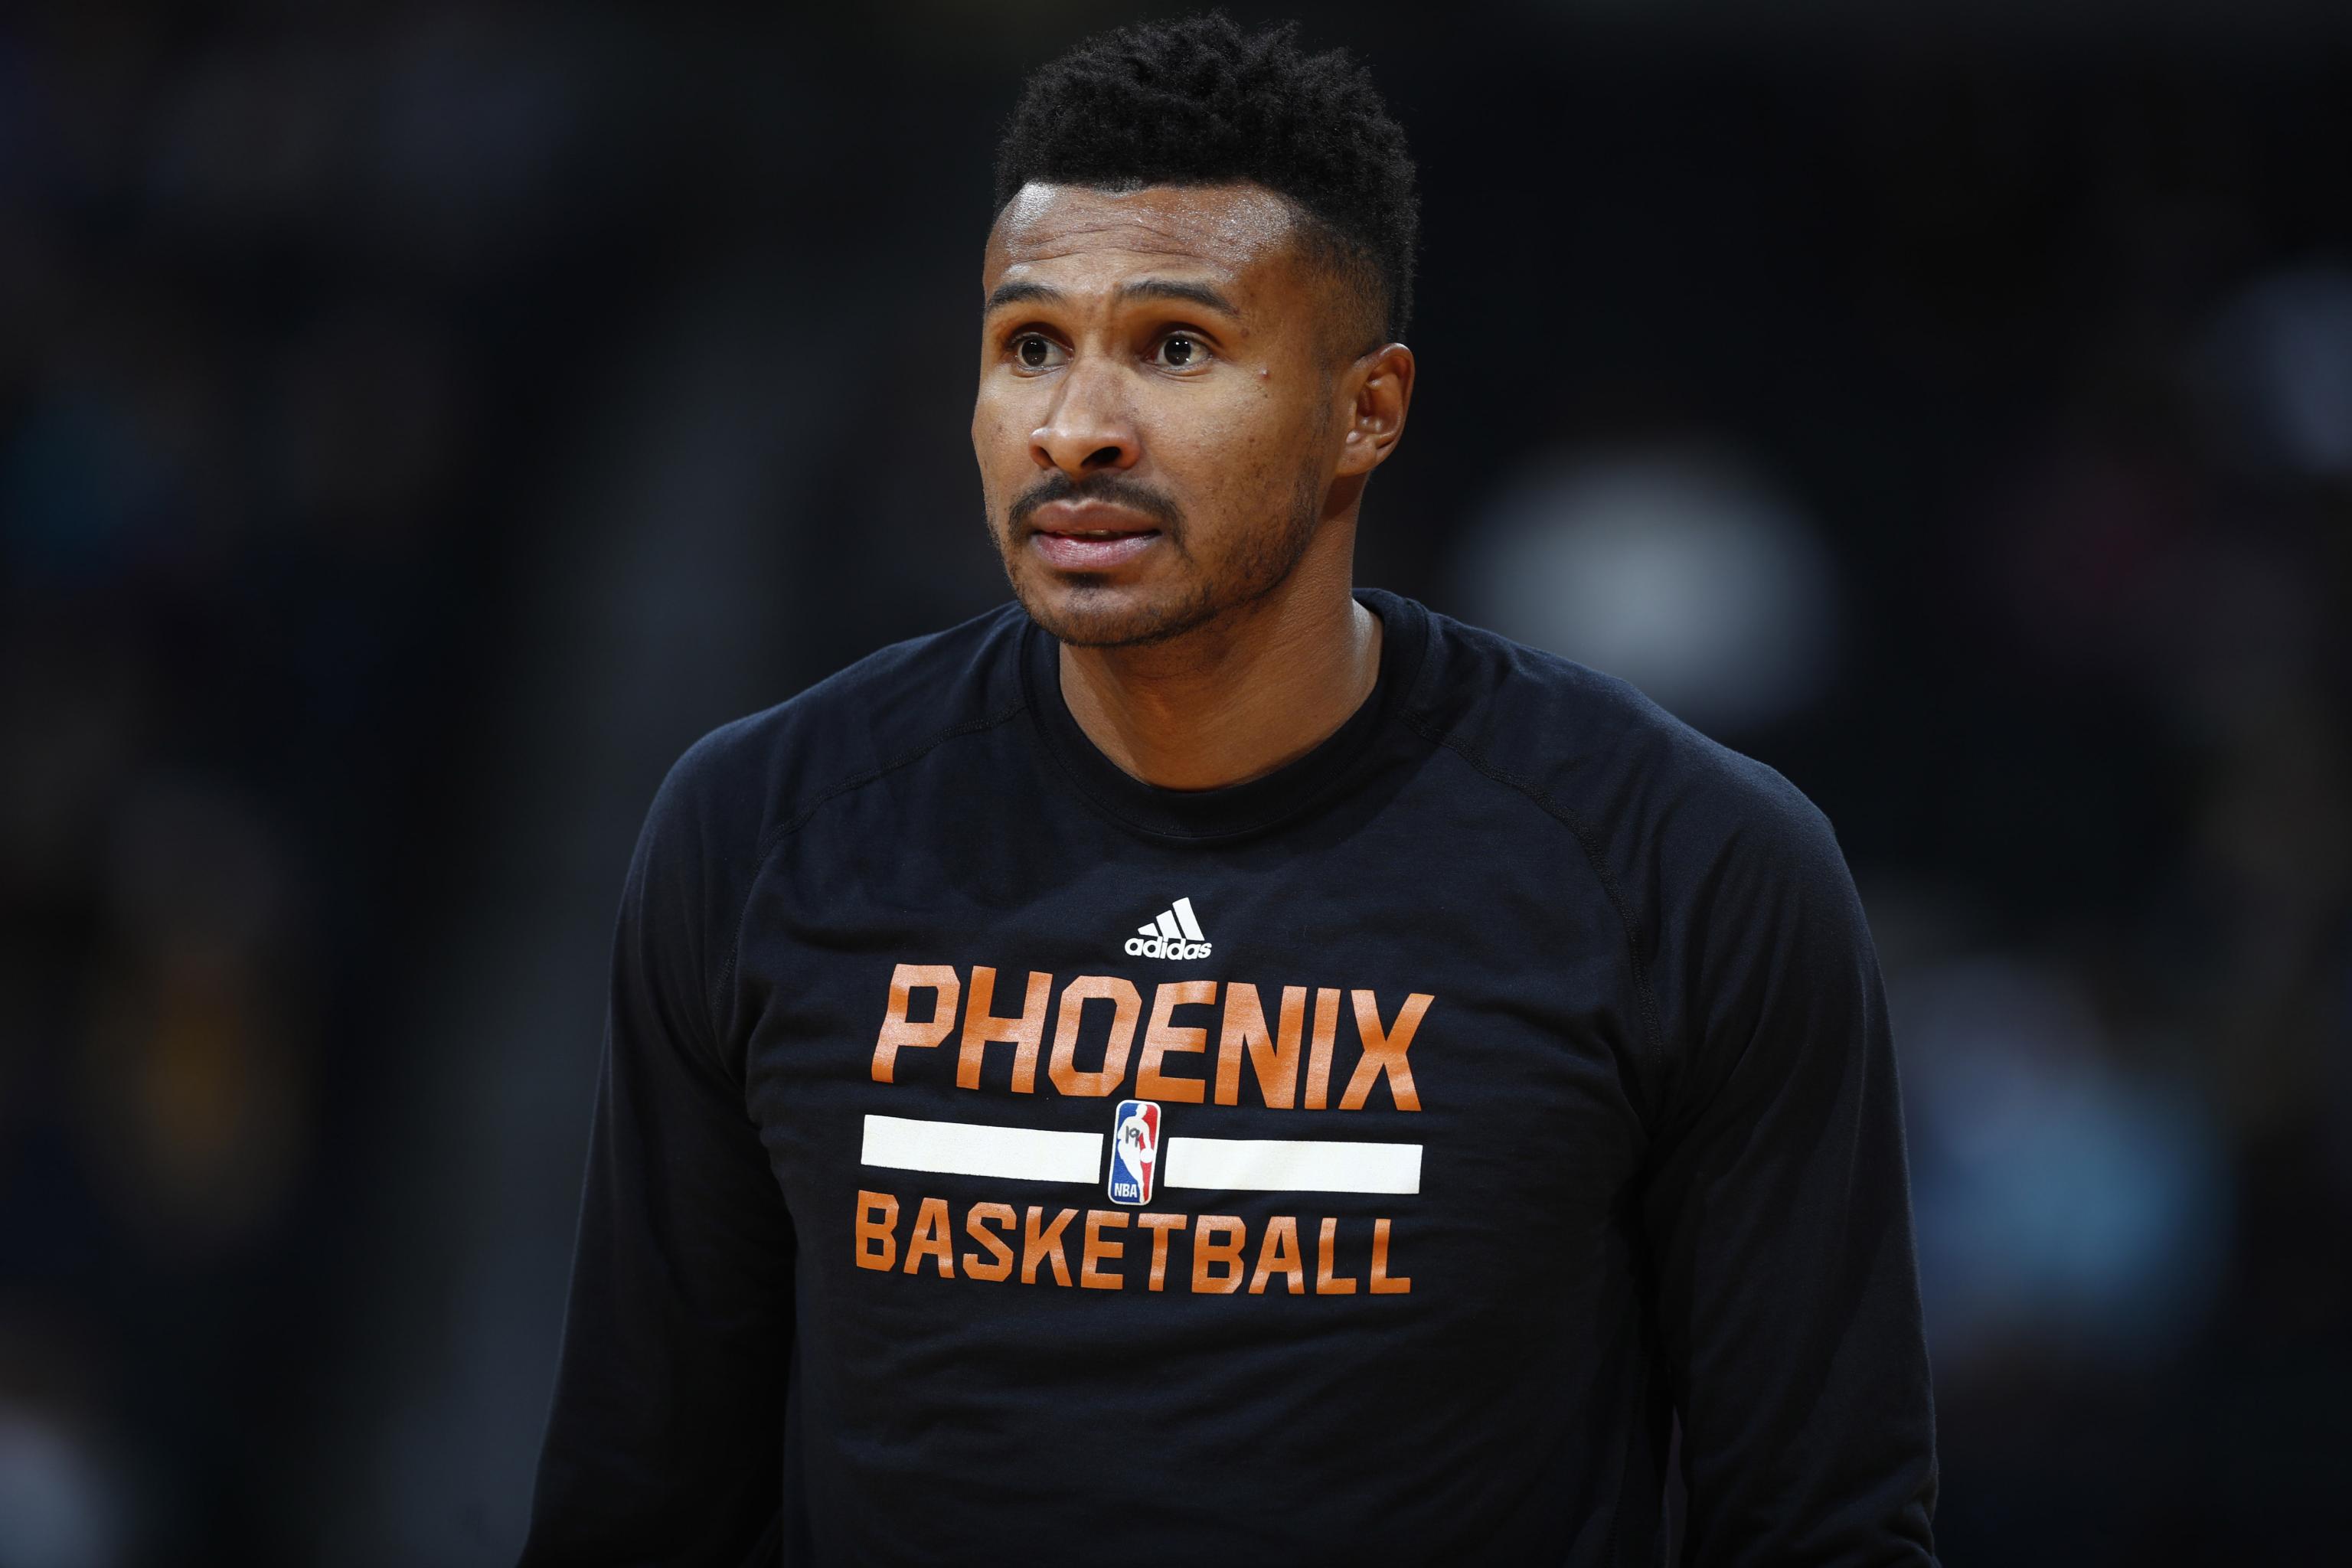 Leandro Barbosa joins Warriors coaching staff - Golden State Of Mind